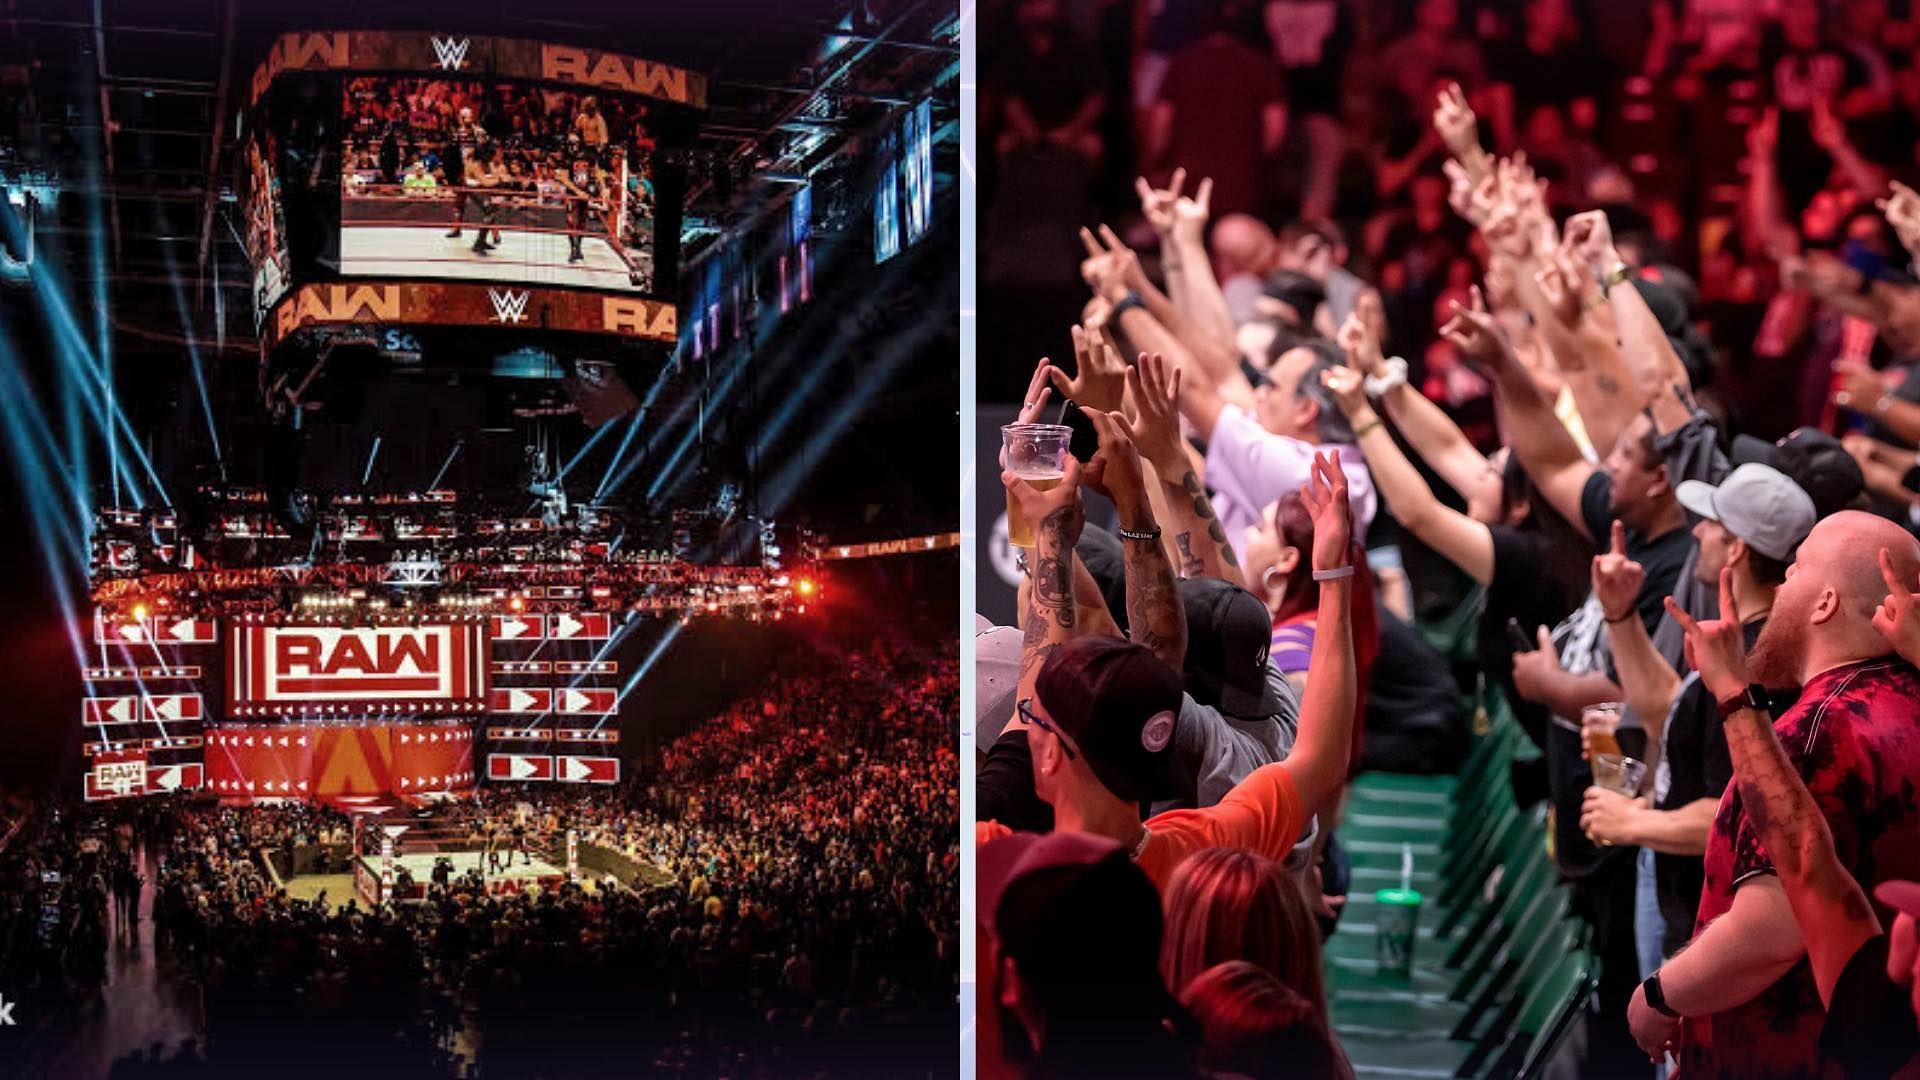 WWE RAW this week was live from the Paycom Center in Oklahoma City, Oklahoma